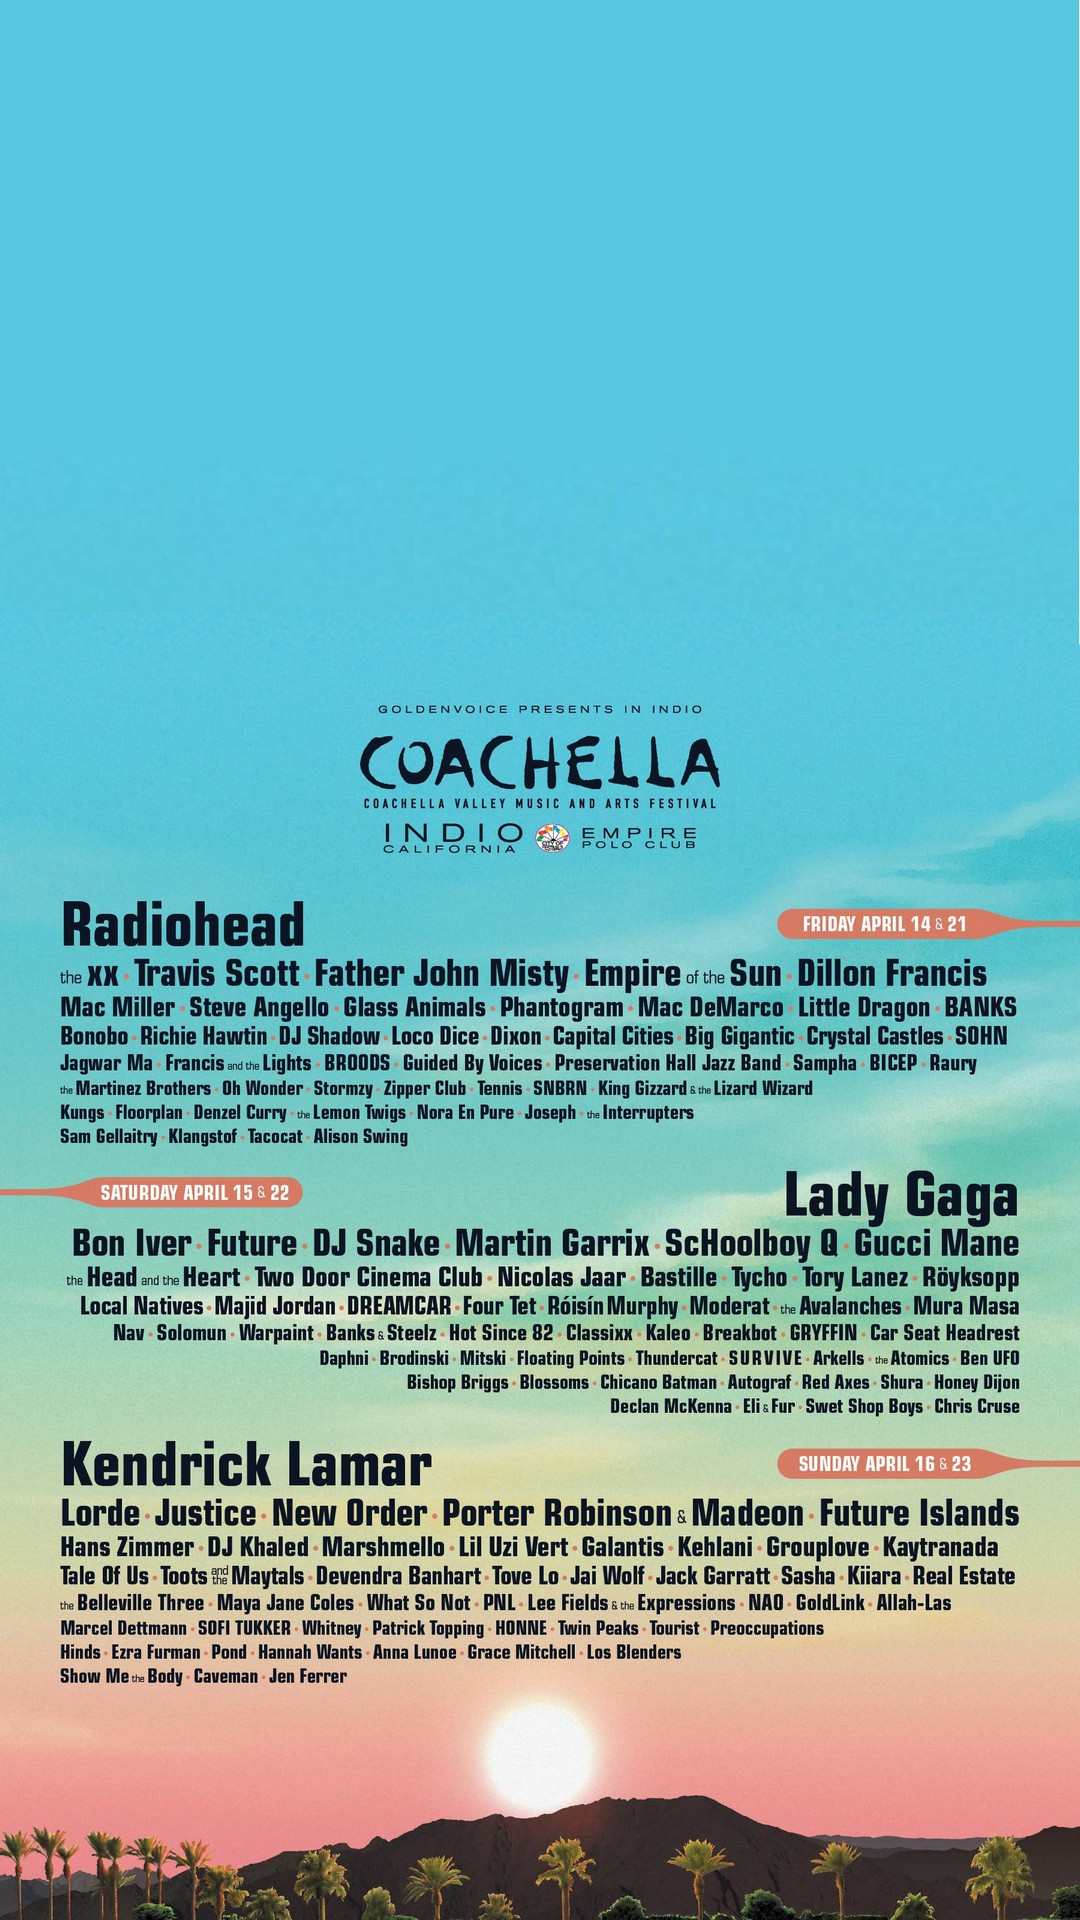 Coachella 2019 iPhone 7 Wallpaper HD with high-resolution 1080x1920 pixel. Download all Mobile Wallpapers and Use them as wallpapers for your iPhone, Tablet, iPad, Android and other mobile devices